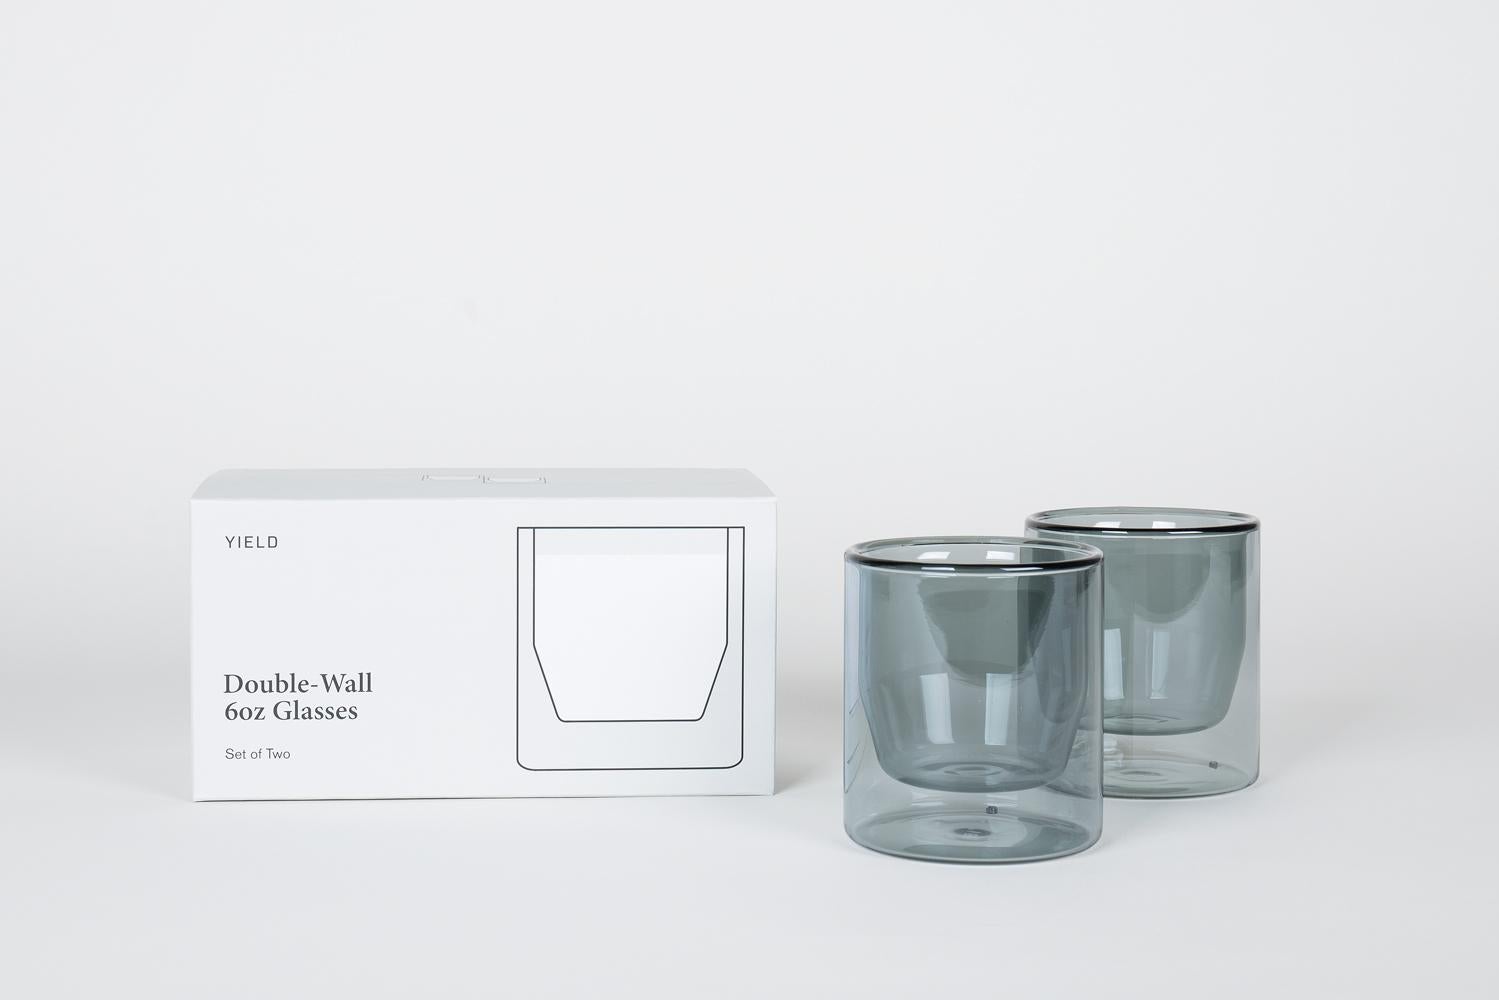 Double-Wall 6oz Glasses, Set of Two, Gray For Sale 1